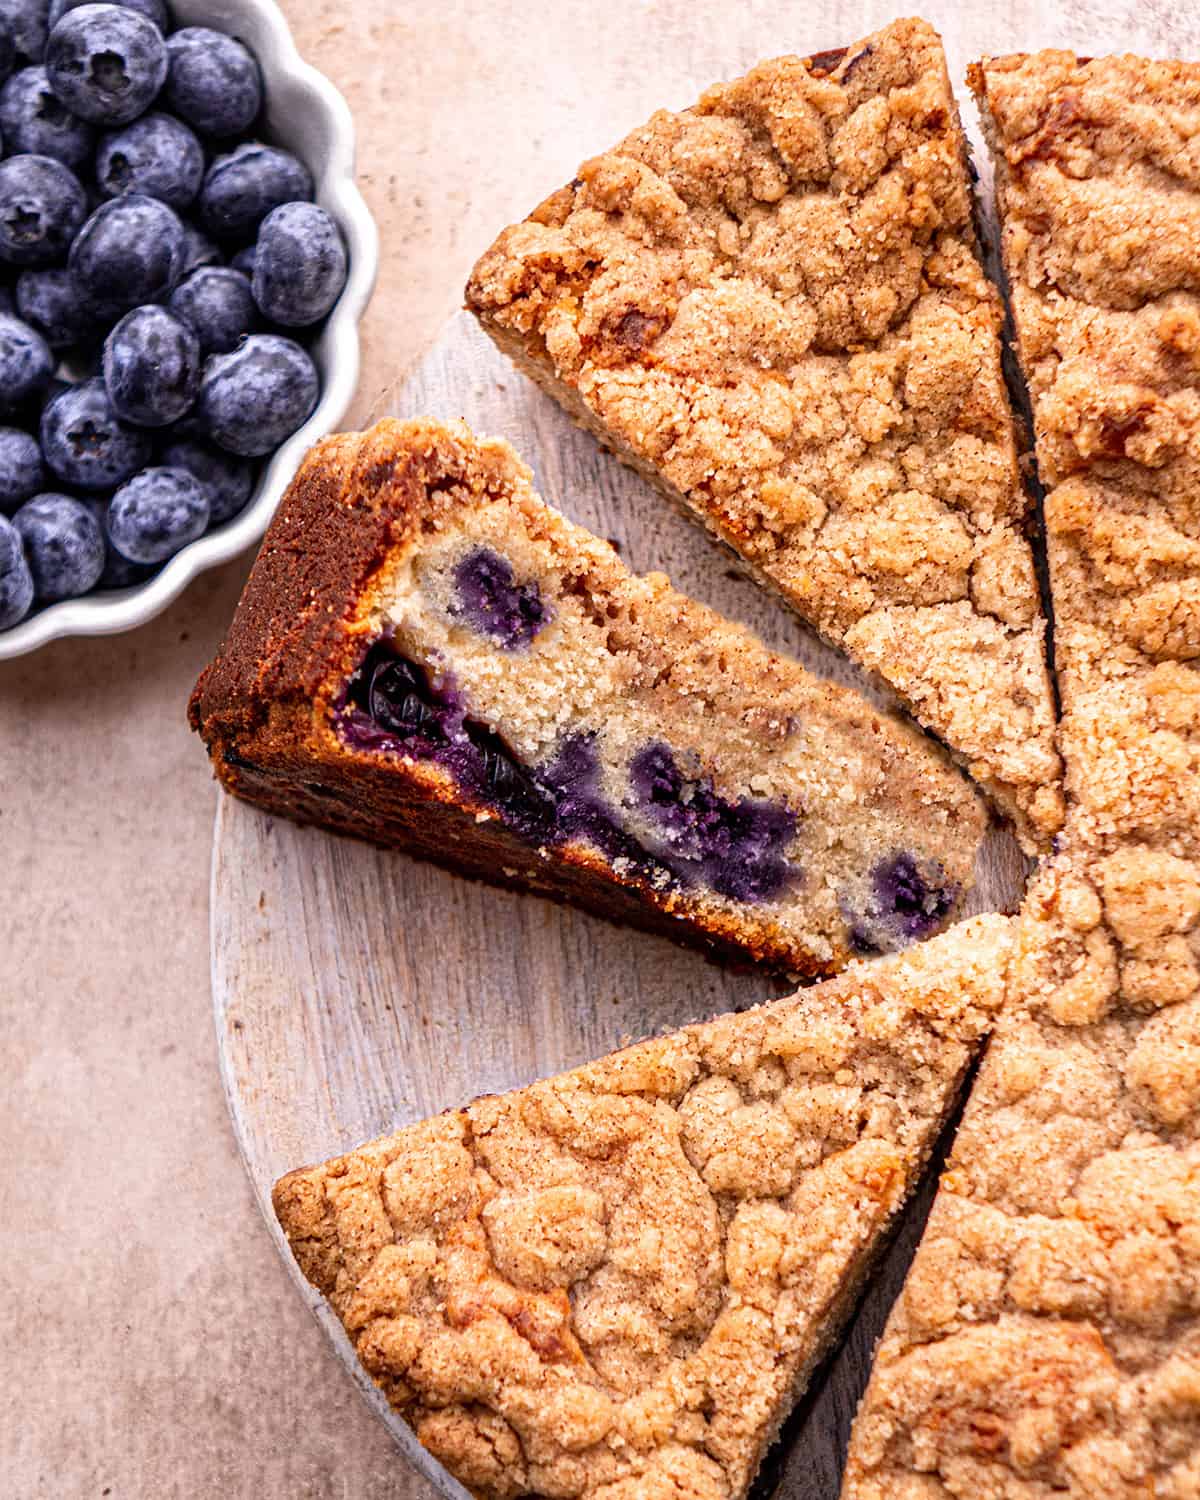 Blueberry Coffee Cake with 3 slices cut out of it